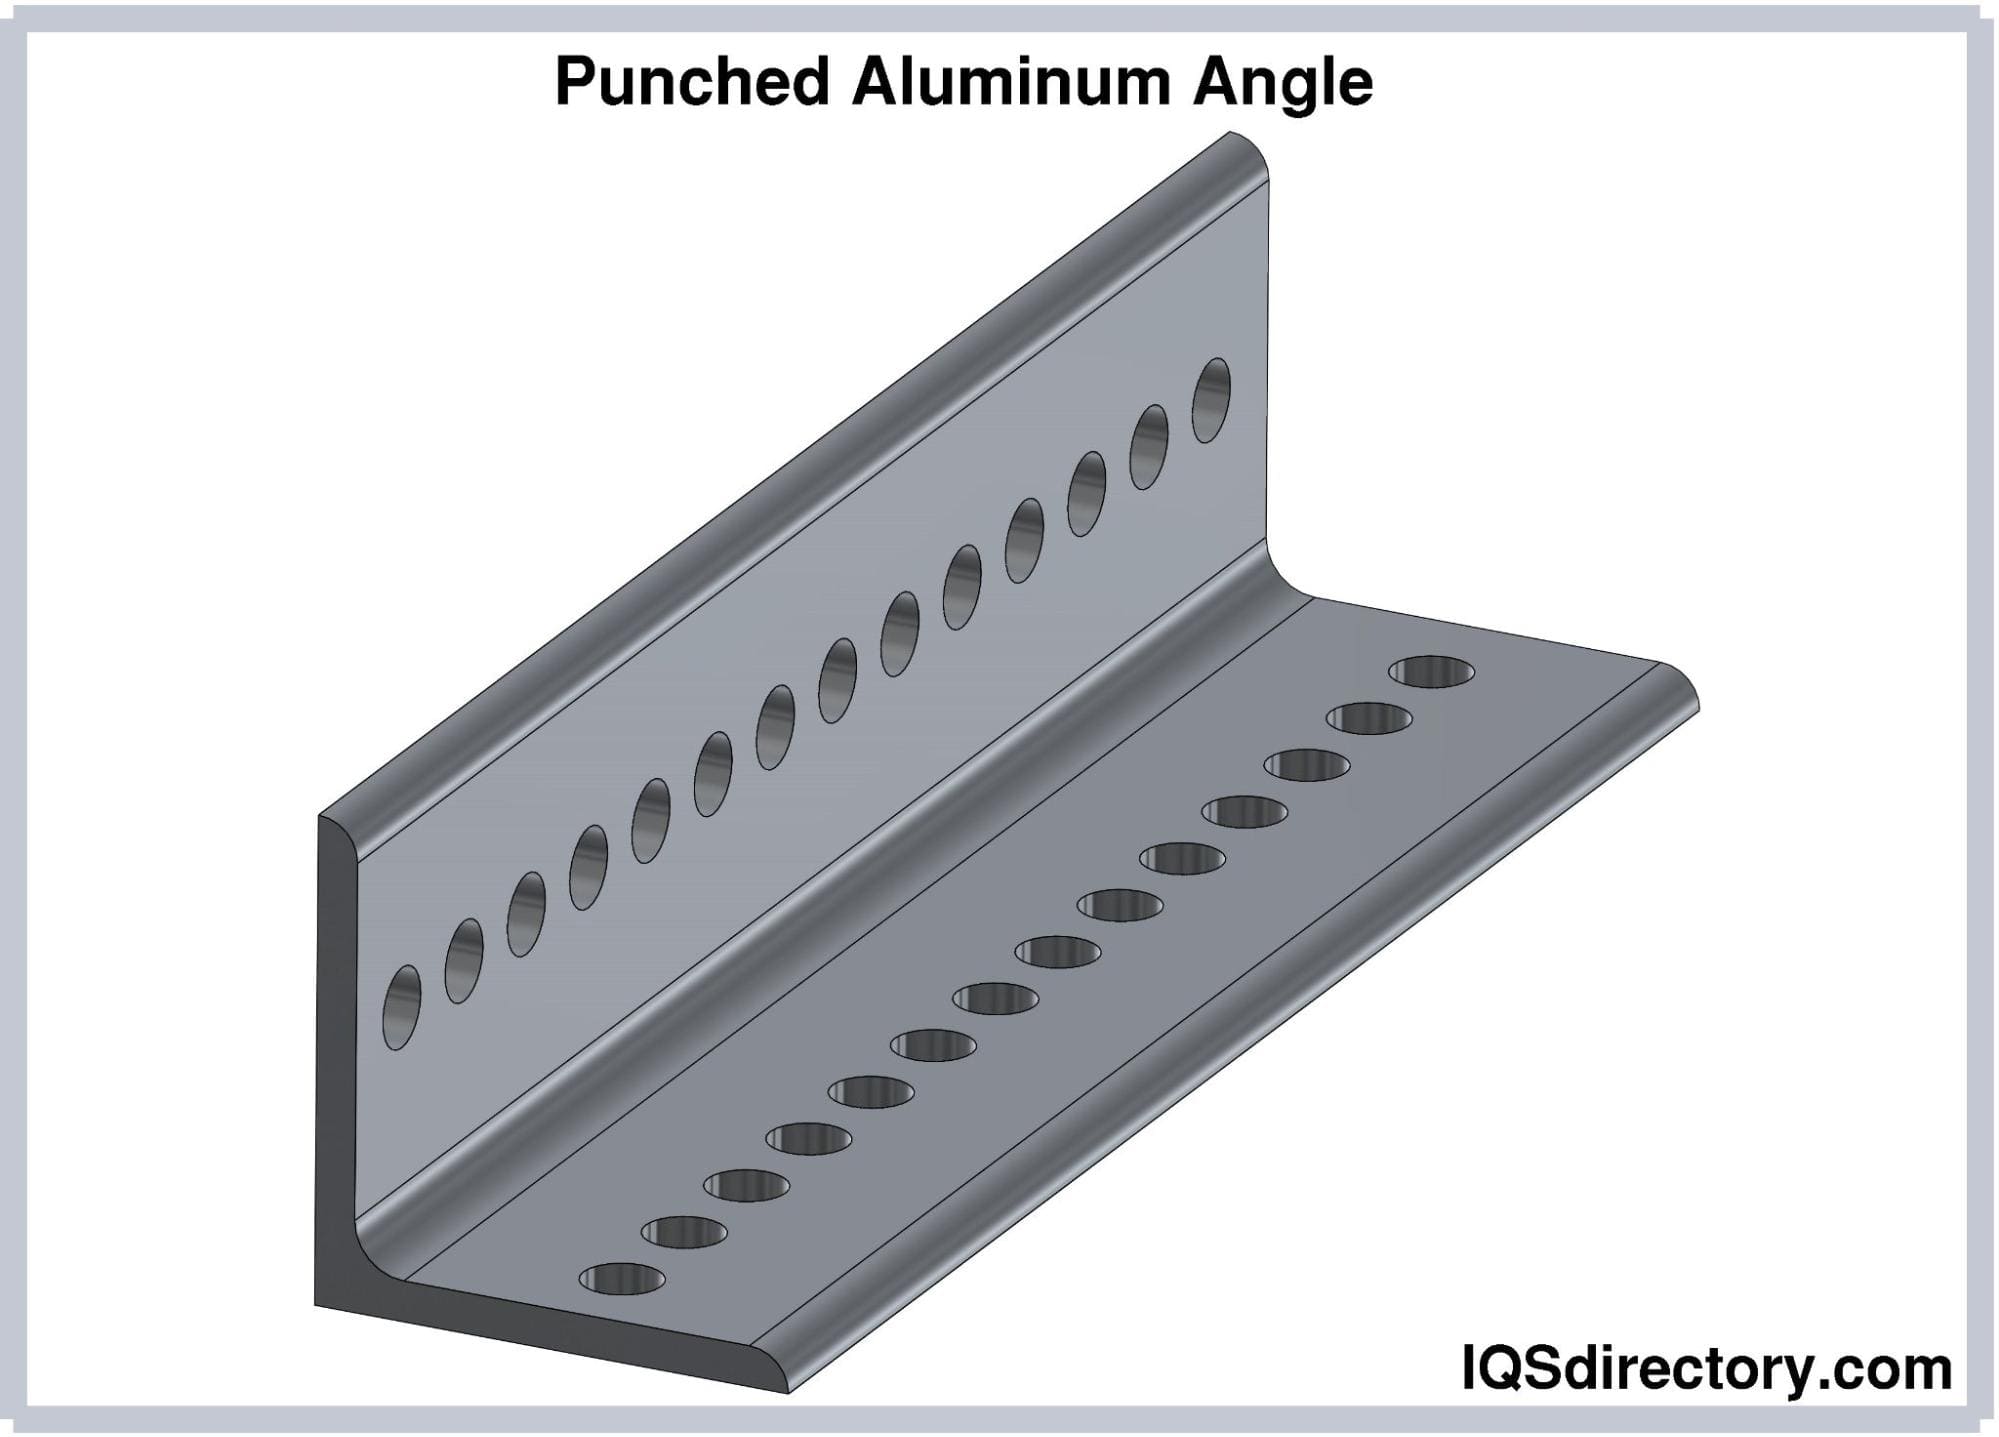 Punched Aluminum Angle